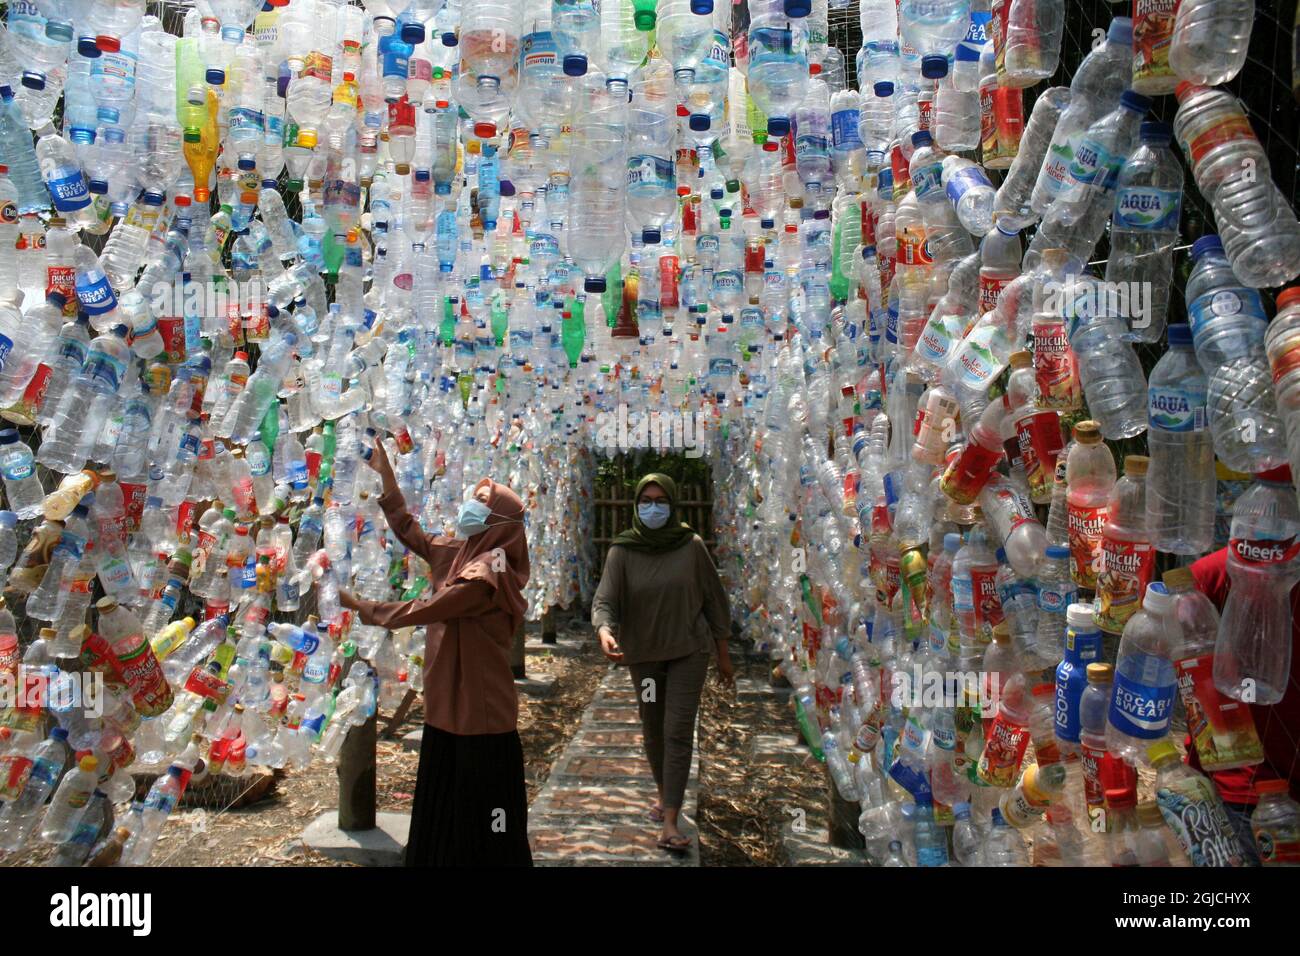 Gresik, Indonesia. 9th Sep, 2021. People walk through an installation set up with plastic bottles during an environmental campaign in Gresik, East Java, Indonesia, Sept. 9, 2021. The plastic installation was built by plastic garbages collected from rivers in Gresik and Surabaya. Credit: Kurniawan/Xinhua/Alamy Live News Stock Photo